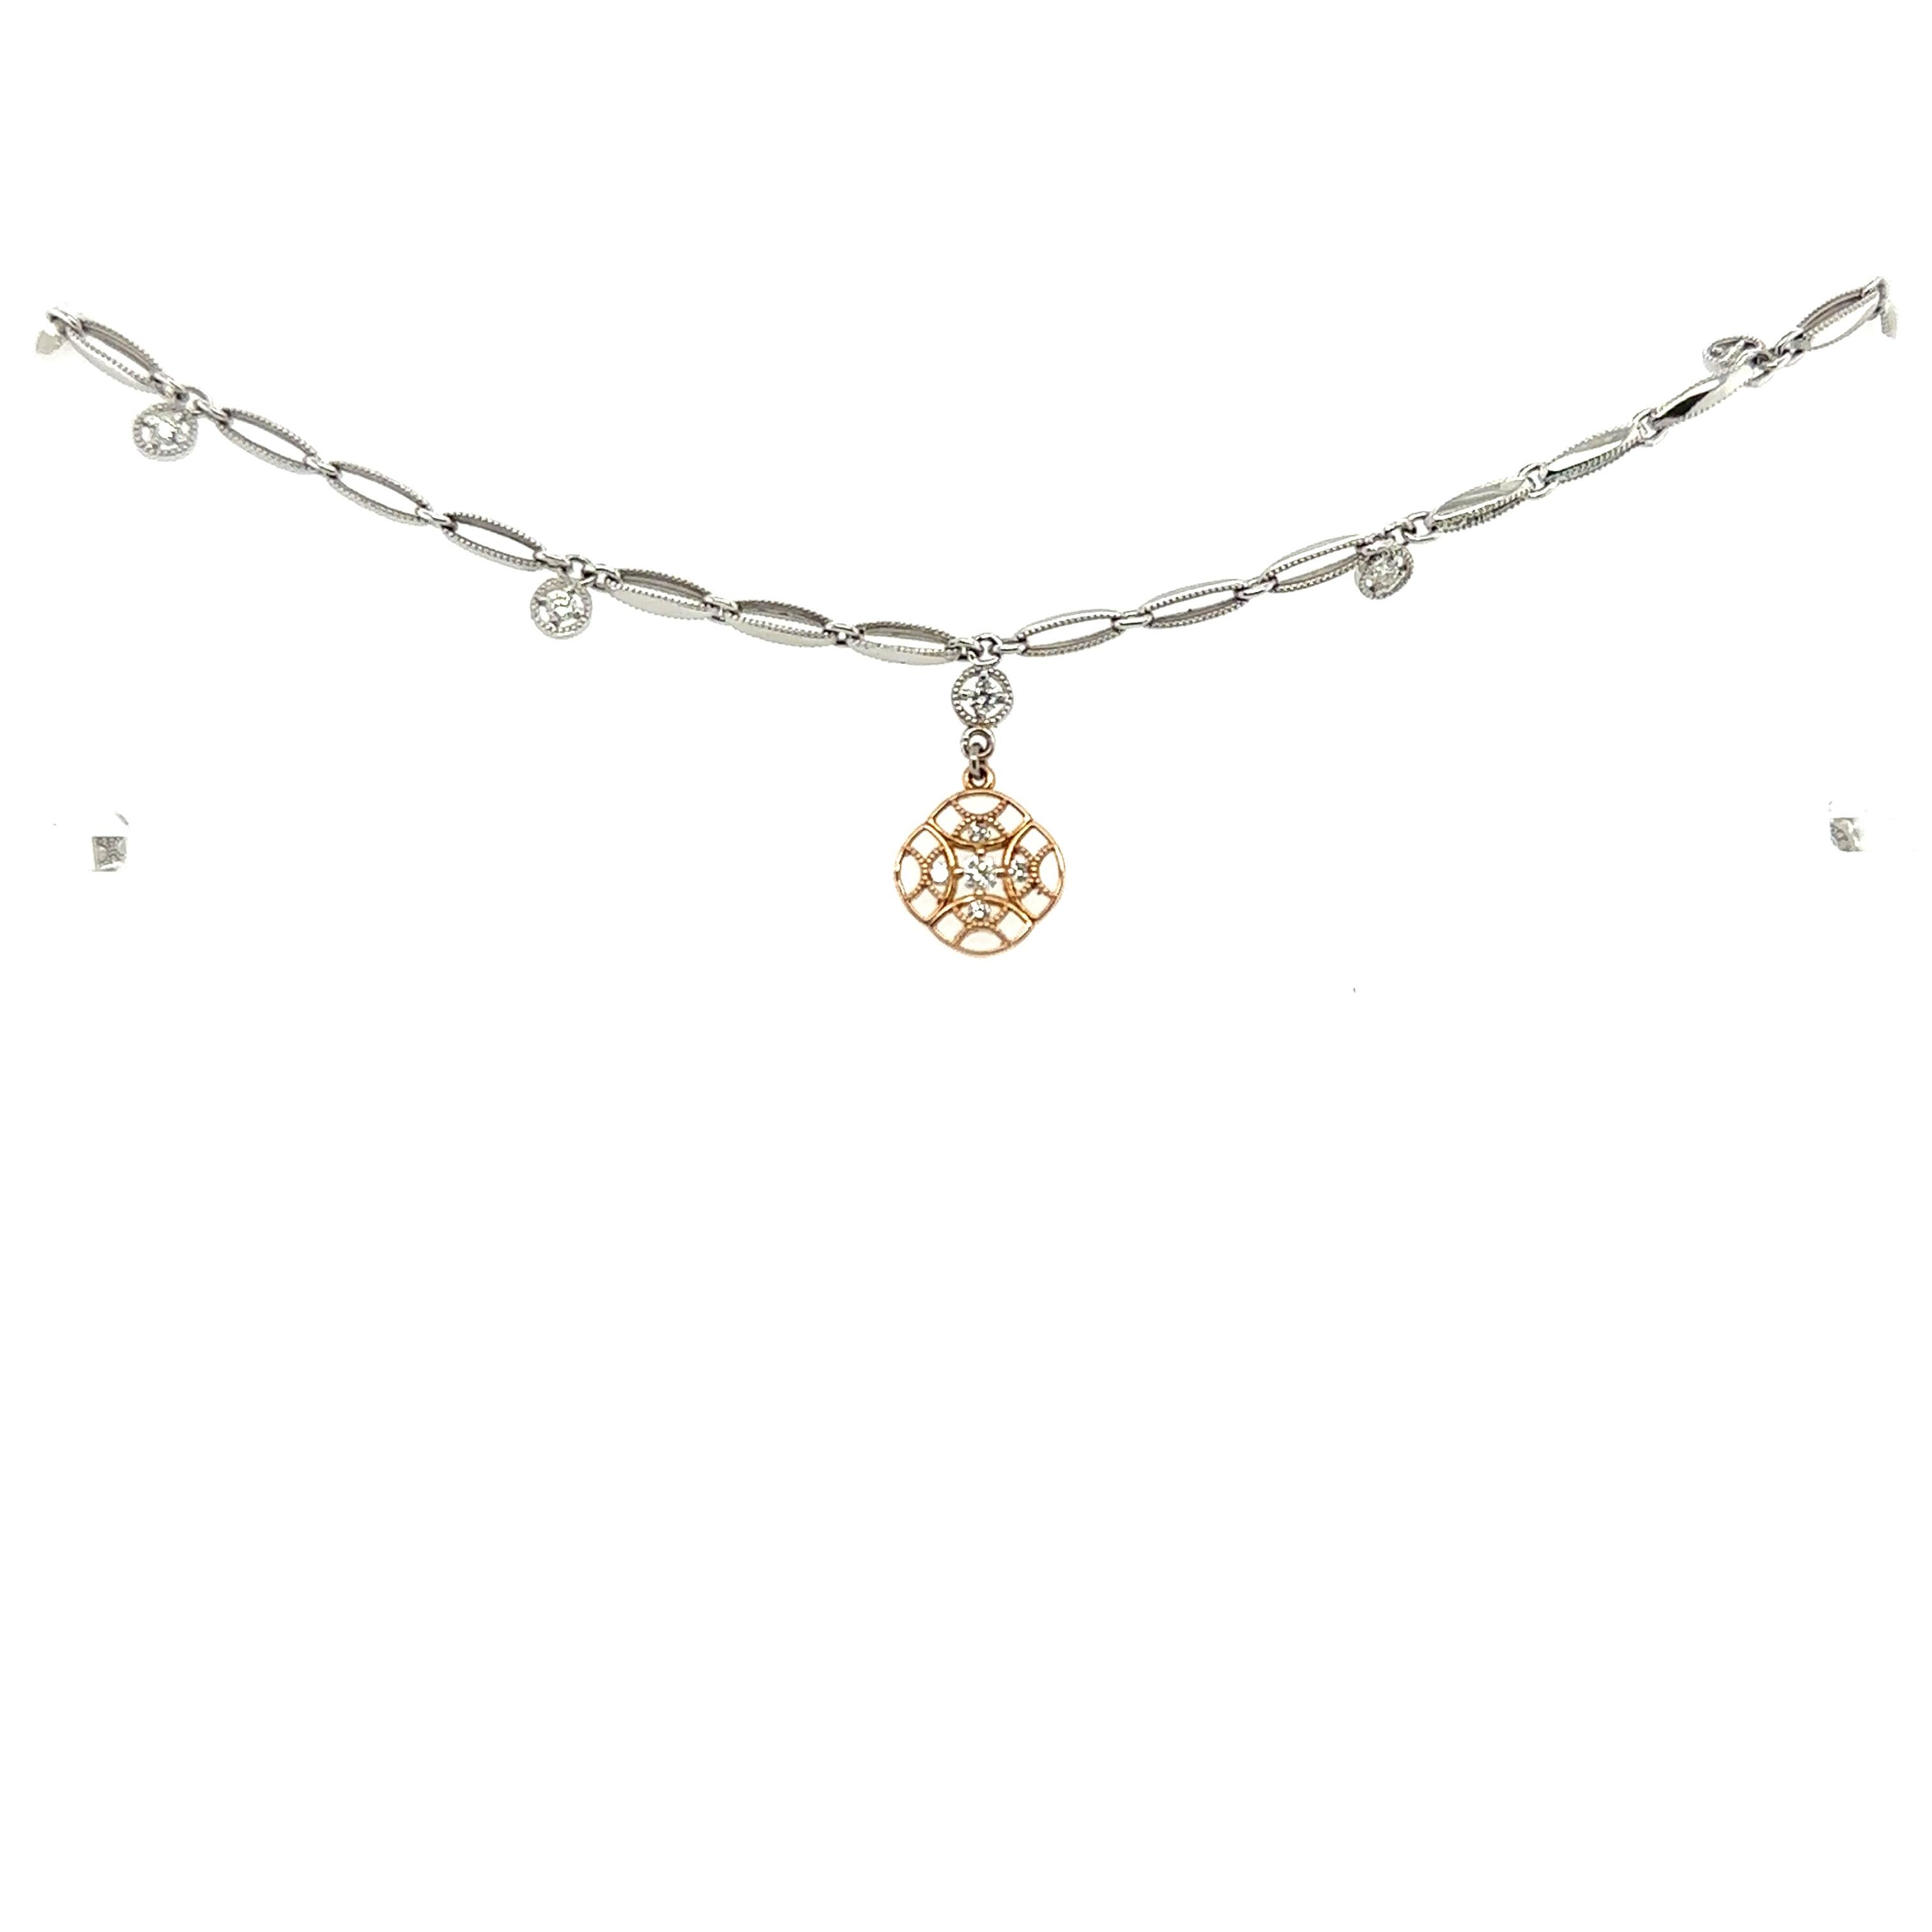 From American Jewellry company Tacori comes thos delicate bracelet. Crafted of 18k white gold with 6 small diamond charms hanging around the bracelet. A beautiful rose gold charm hangs from the center of the bracelet and is set with 5 sparkling